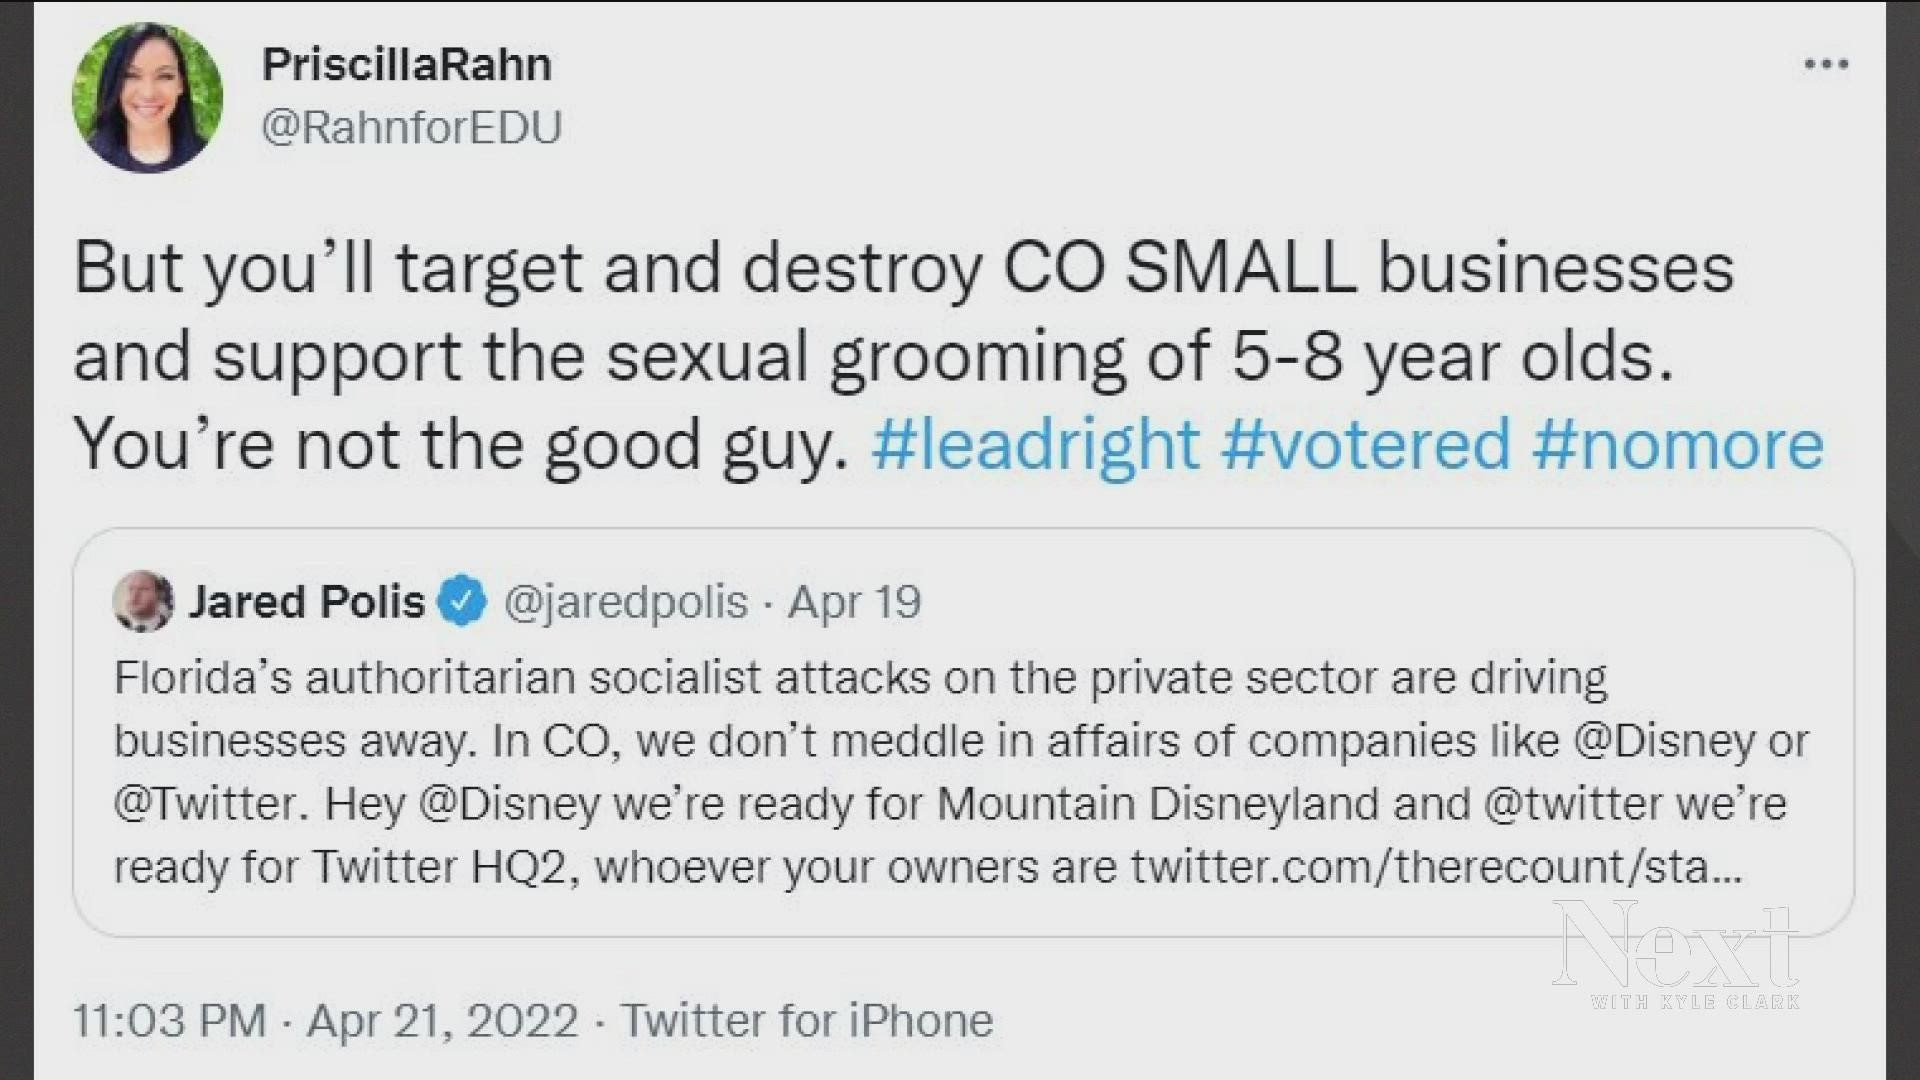 Responding to Gov. Polis' Disney tweet, Priscilla Rahn wrote: "You'll target and destroy CO SMALL businesses and support the sexual grooming of 5-8 year olds."